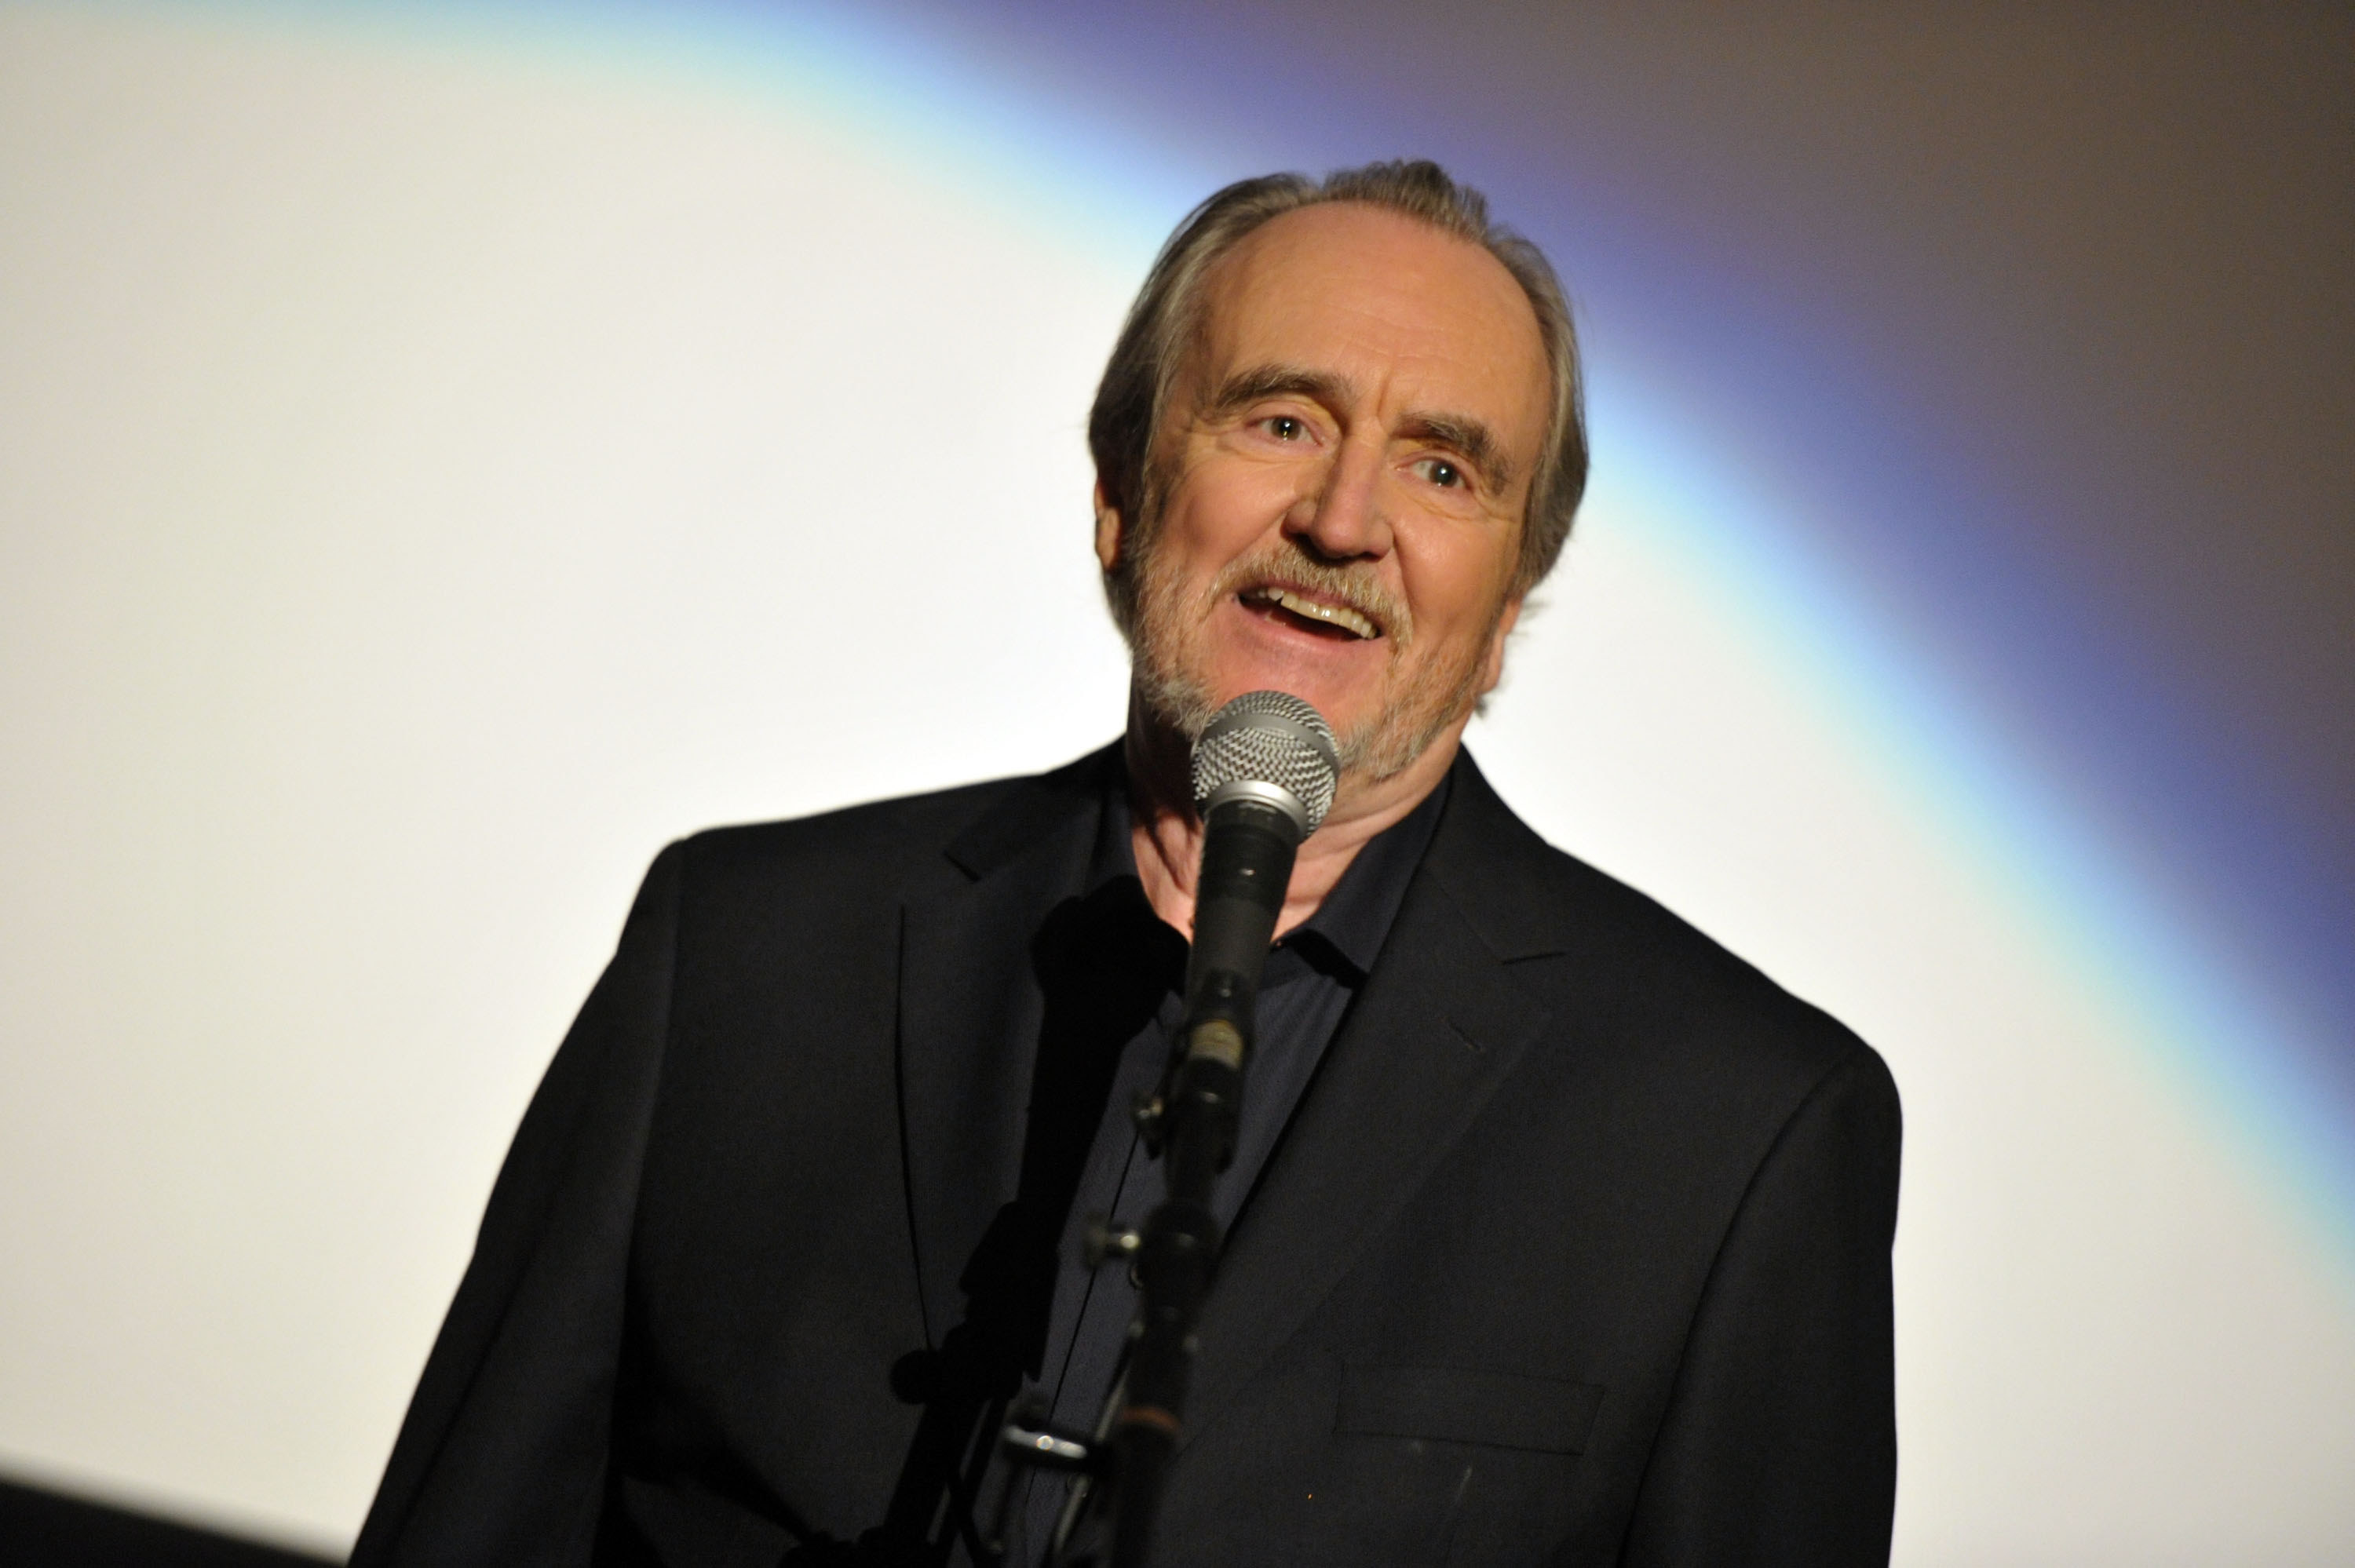 Wes Craven talking into a microphone